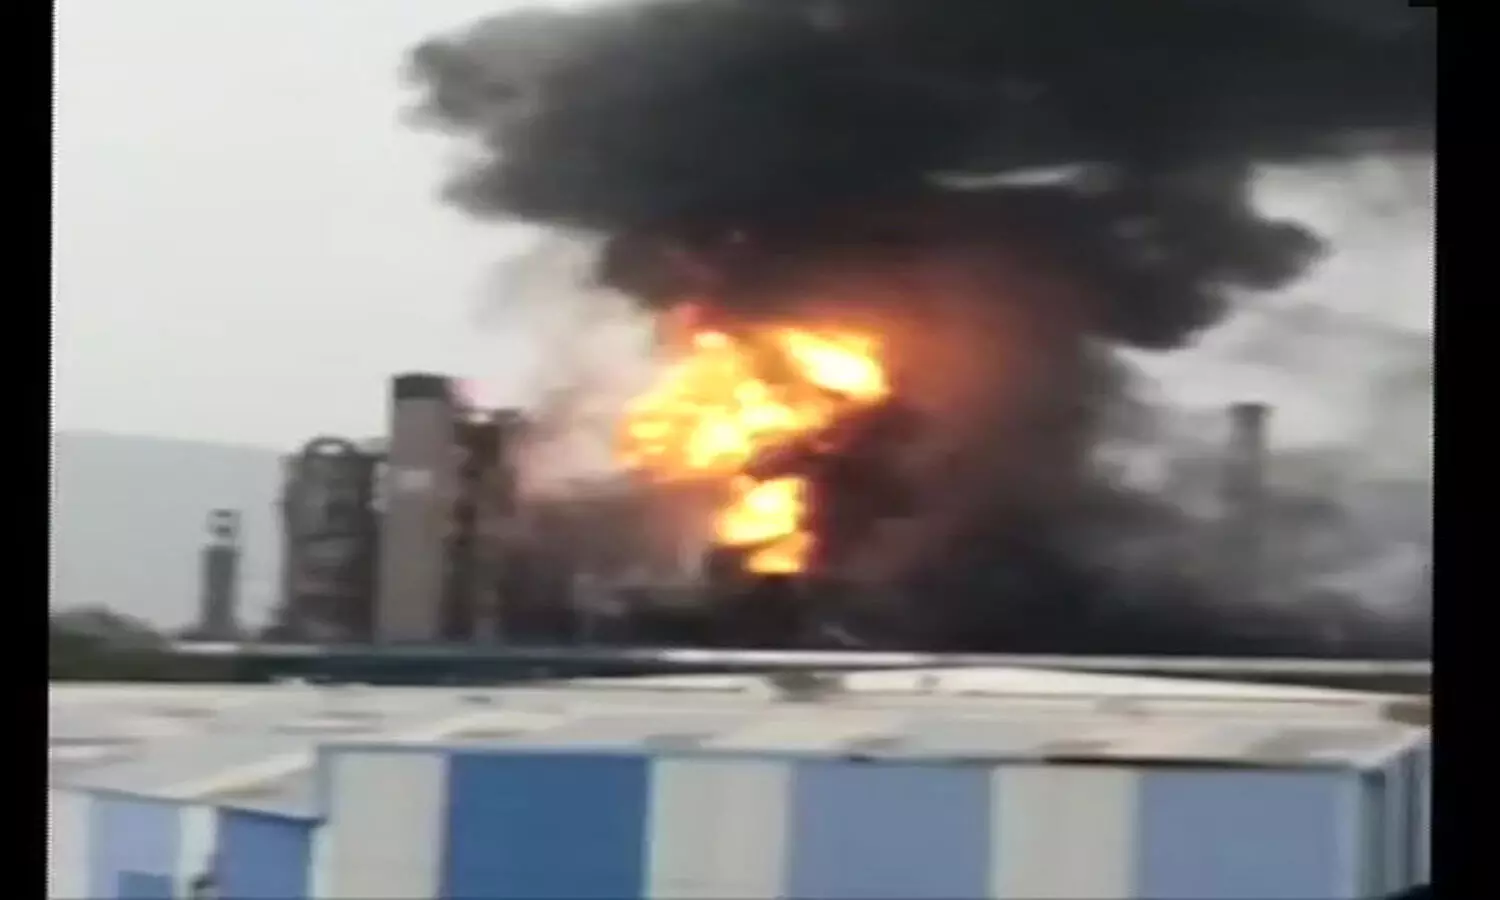 Major Fire breaks out at HPCL plant in Visakhapatnam, 5 tenders at spot